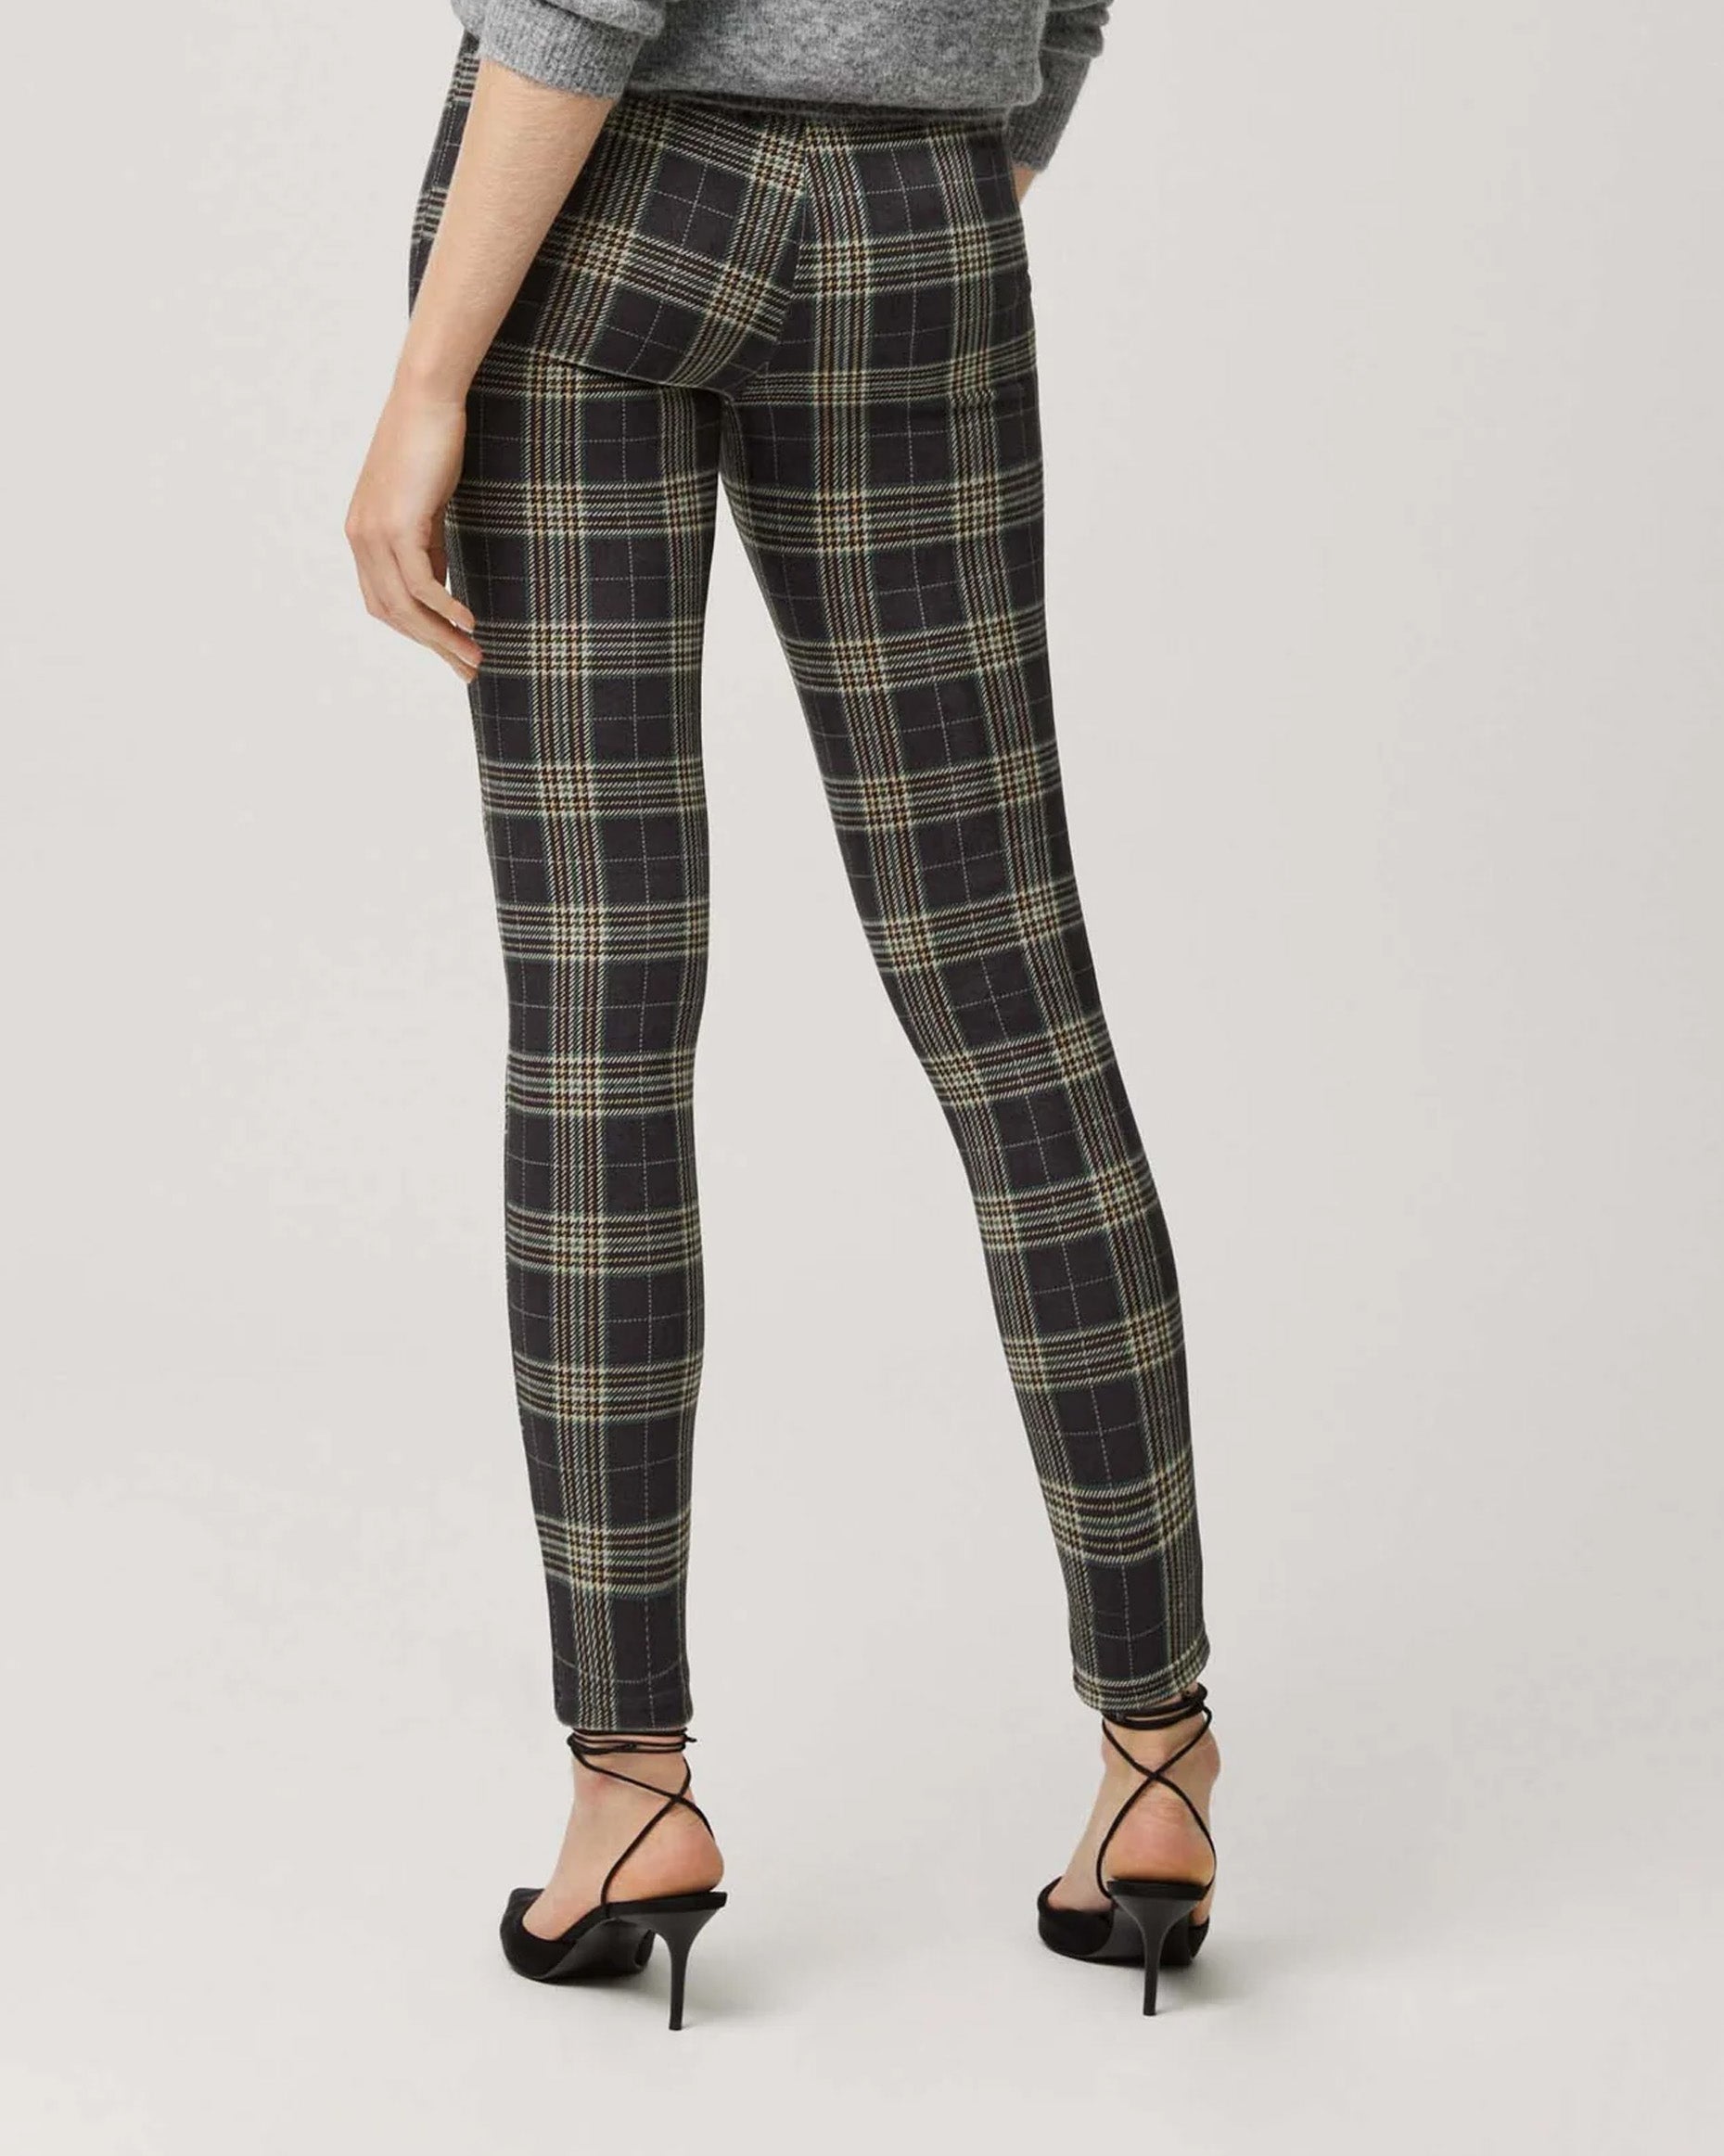 Ysabel Mora 70156 Checked Treggings - Soft plush dark green high waisted stretch trouser leggings (treggings) with a tartan check style pattern in beige, green, cream with a front zip closure and ring pull. Back view.